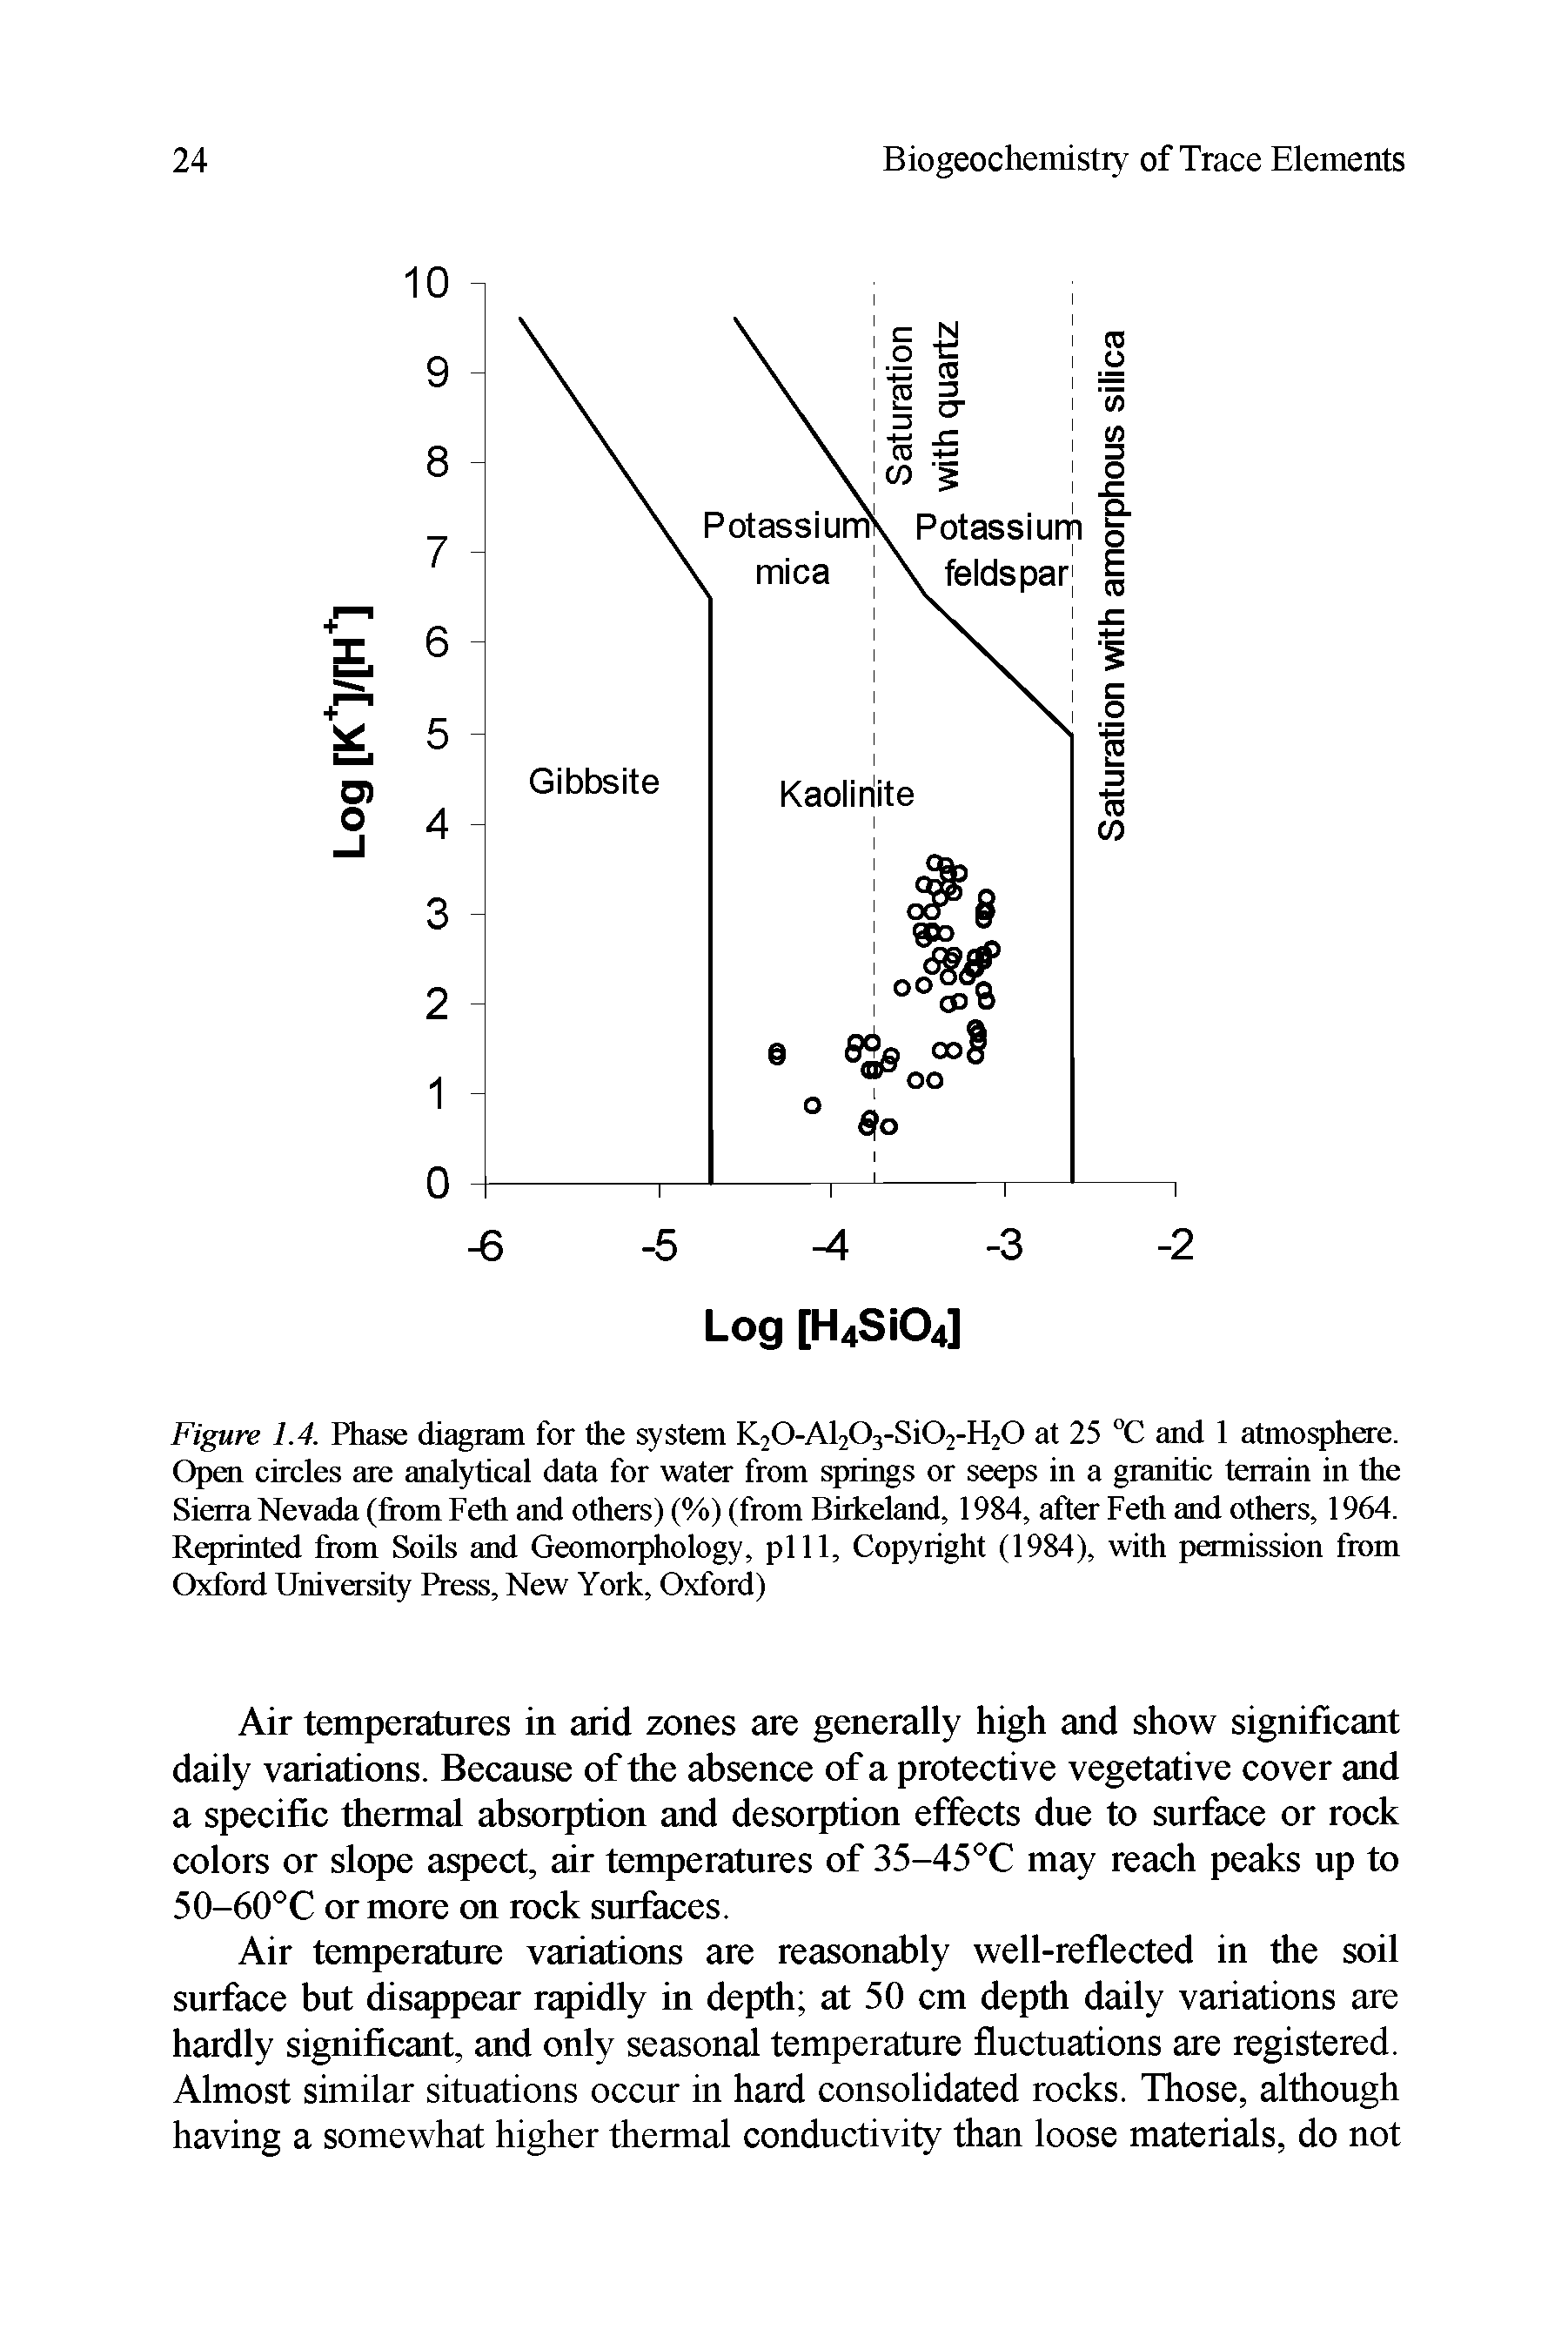 Figure 1.4. Phase diagram for the system K O-AfCVSiCVF O at 25 °C and 1 atmosphere. Open circles are analytical data for water from springs or seeps in a granitic terrain in the Sierra Nevada (from Feth and others) (%) (from Birkeland, 1984, after Feth and others, 1964. Reprinted from Soils and Geomorphology, pill, Copyright (1984), with permission from Oxford University Press, New York, Oxford)...